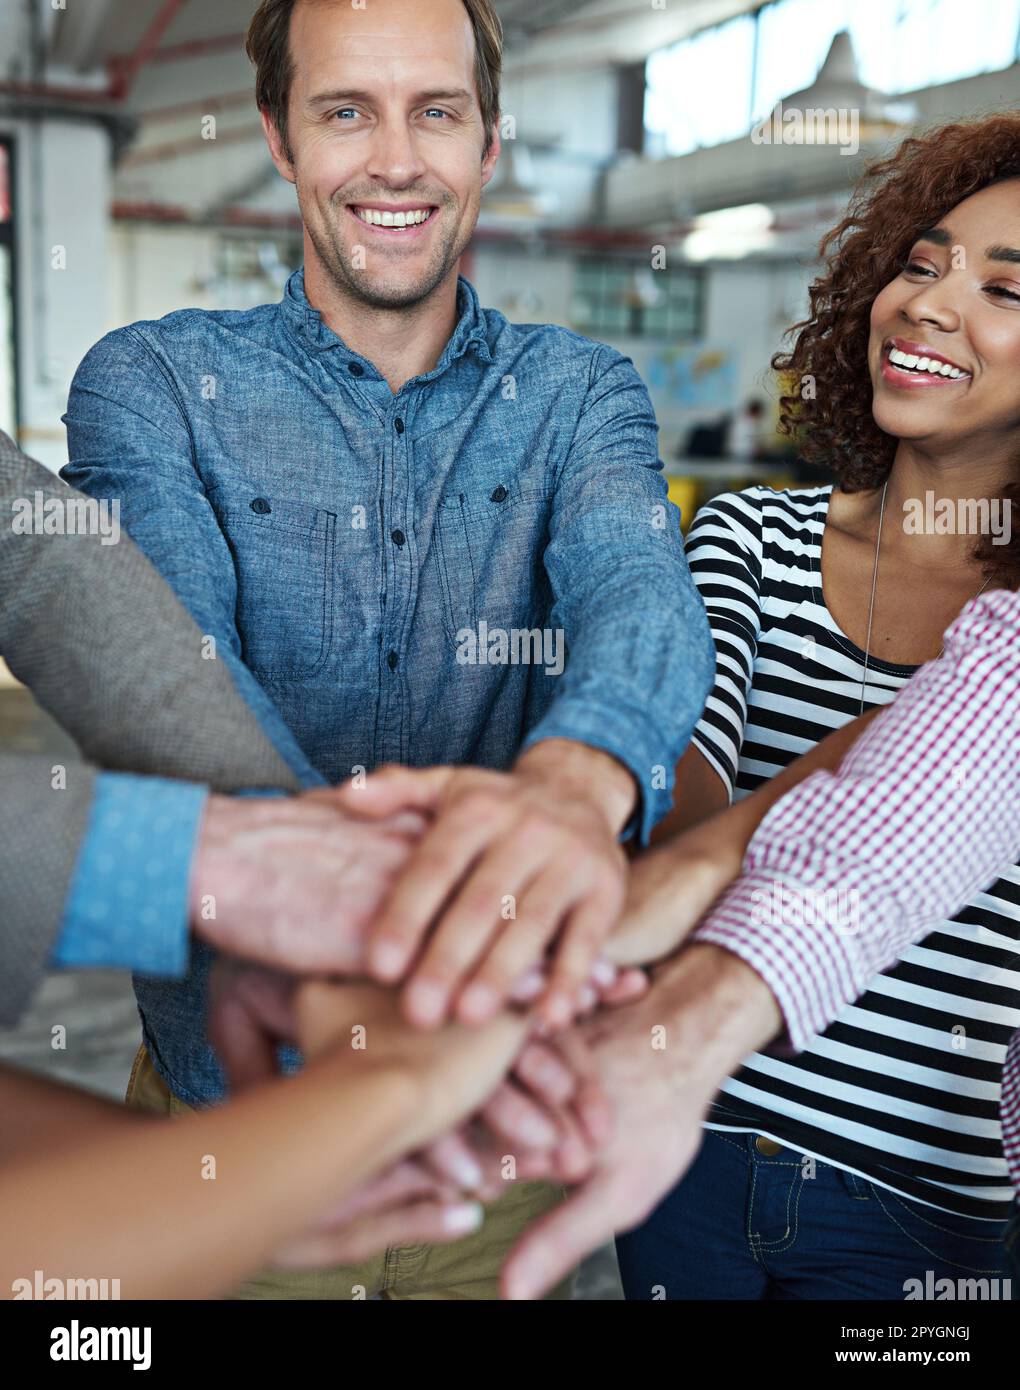 We can do anything as a team. co-workers hand put together in an expression of unity and team spirit. Stock Photo